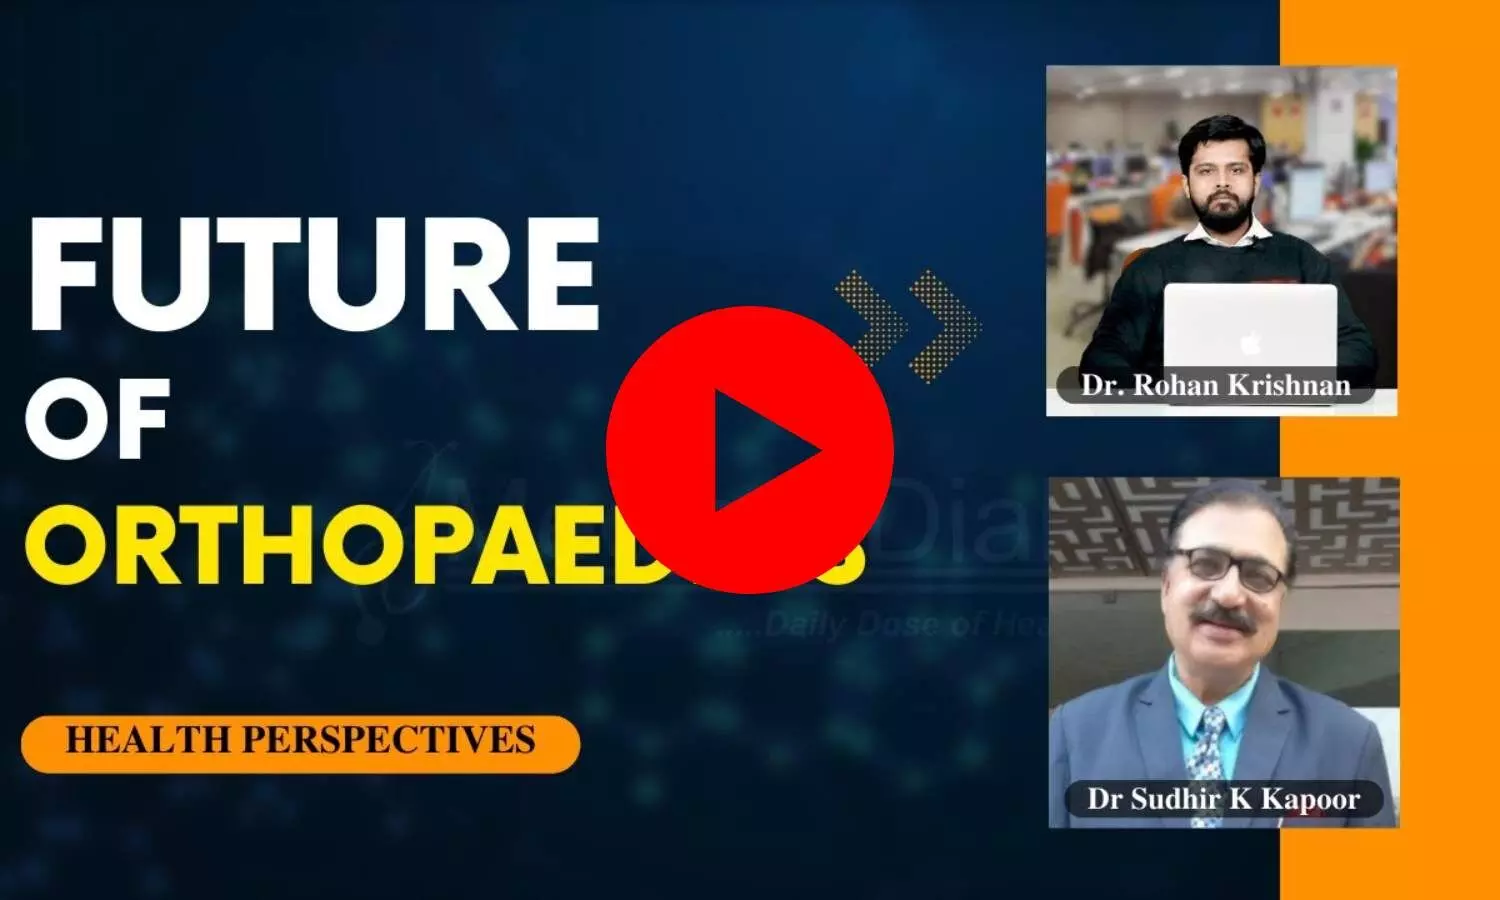 Health Persspecitves: Future of Orthopedics surgery as a branch